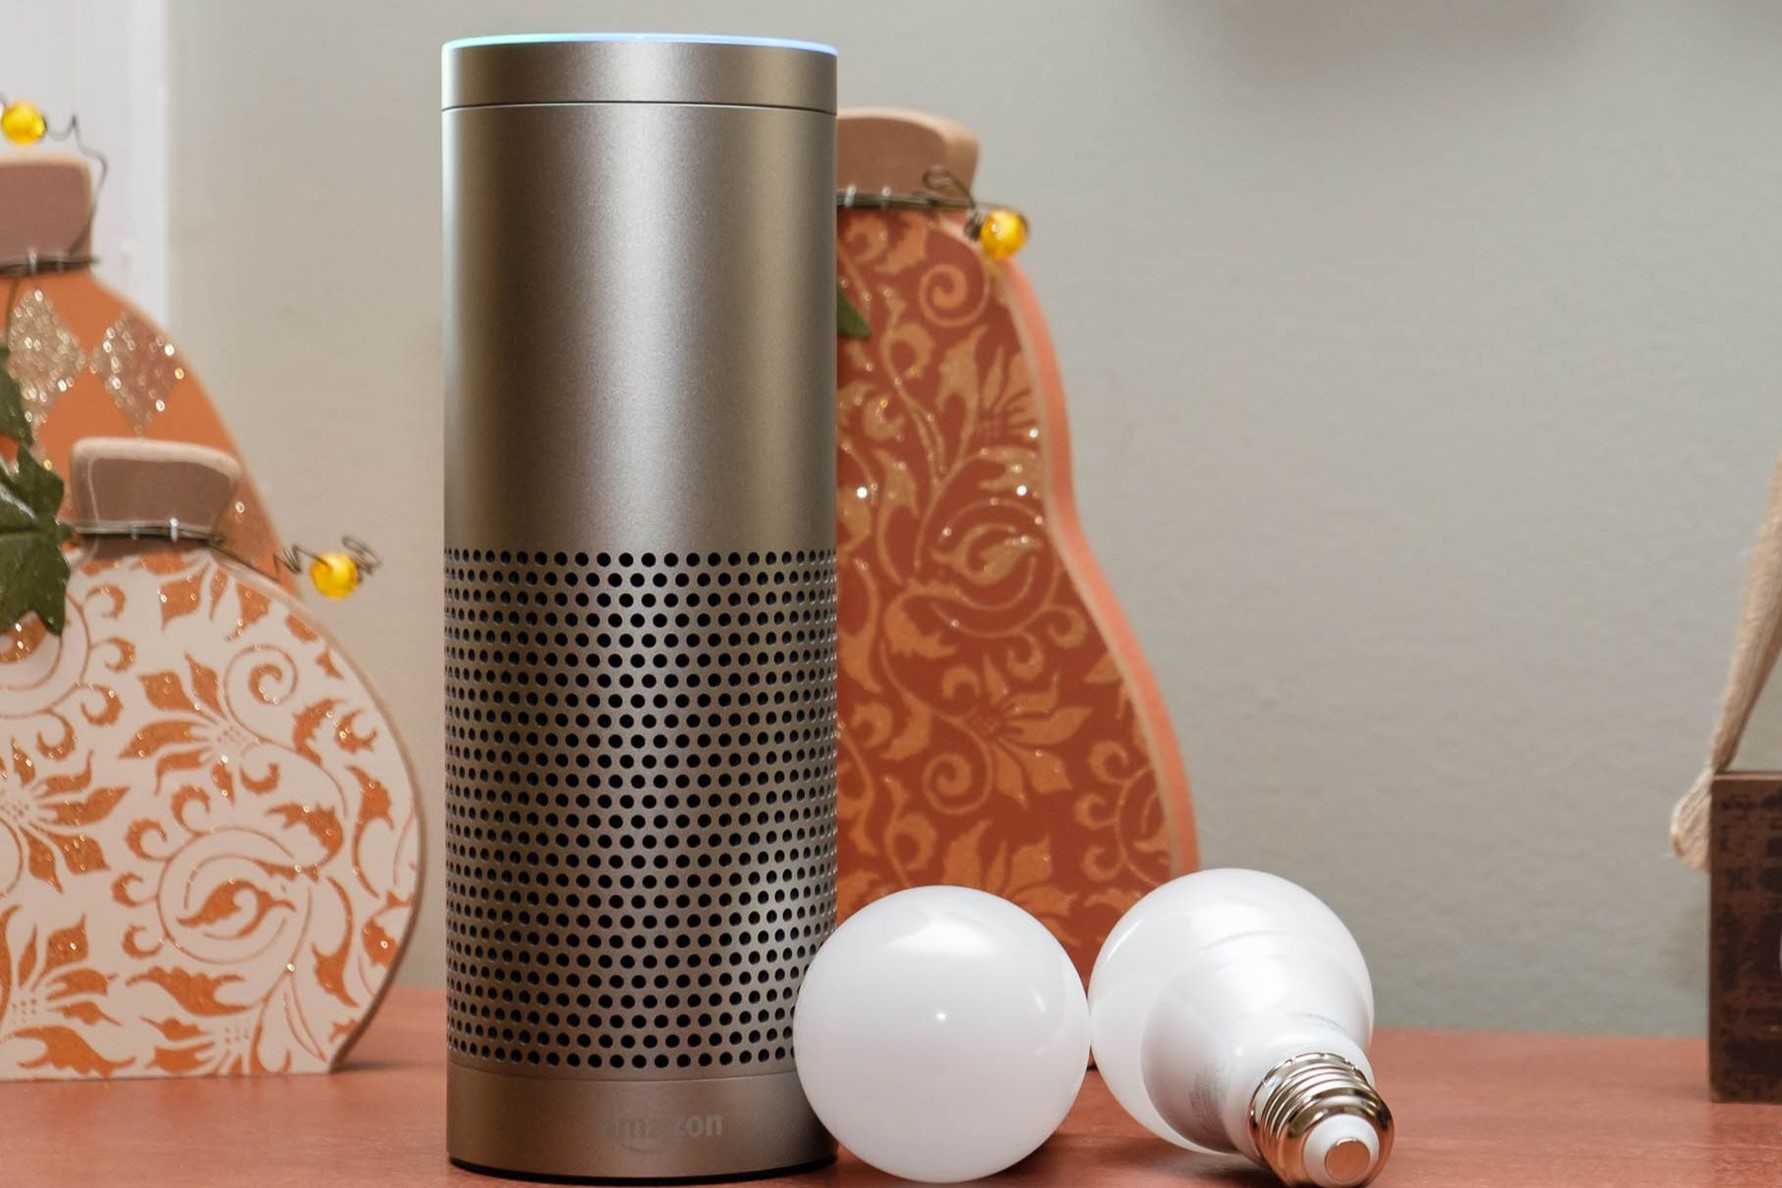 How To Connect Lights To Amazon Echo